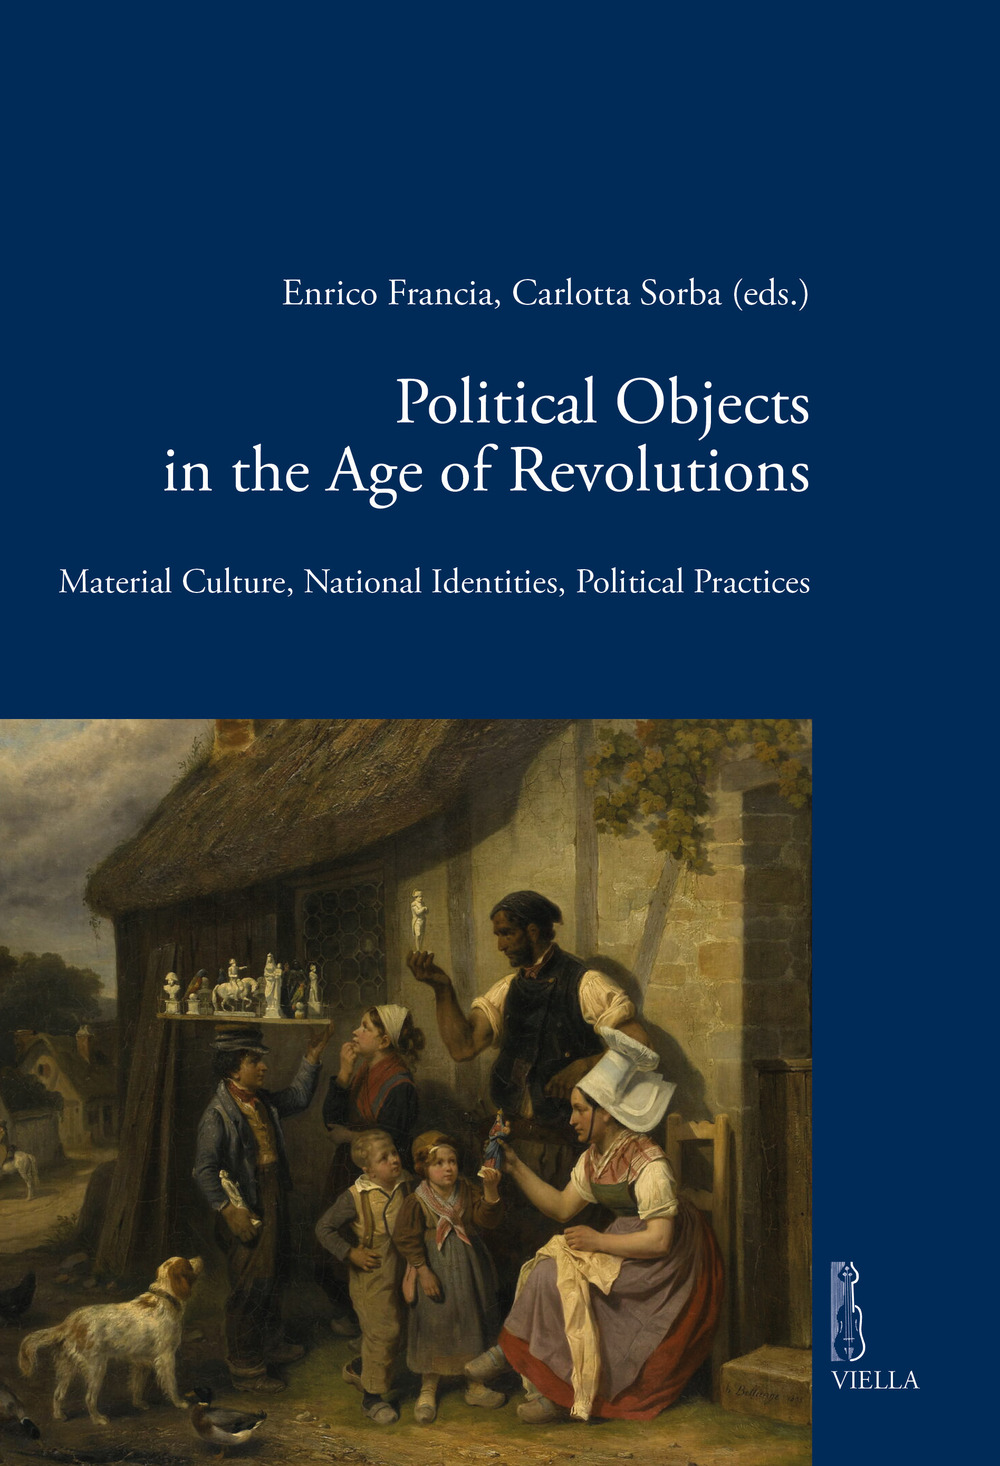 Political objects in the age revolutions. Material culture, national identities, political practices